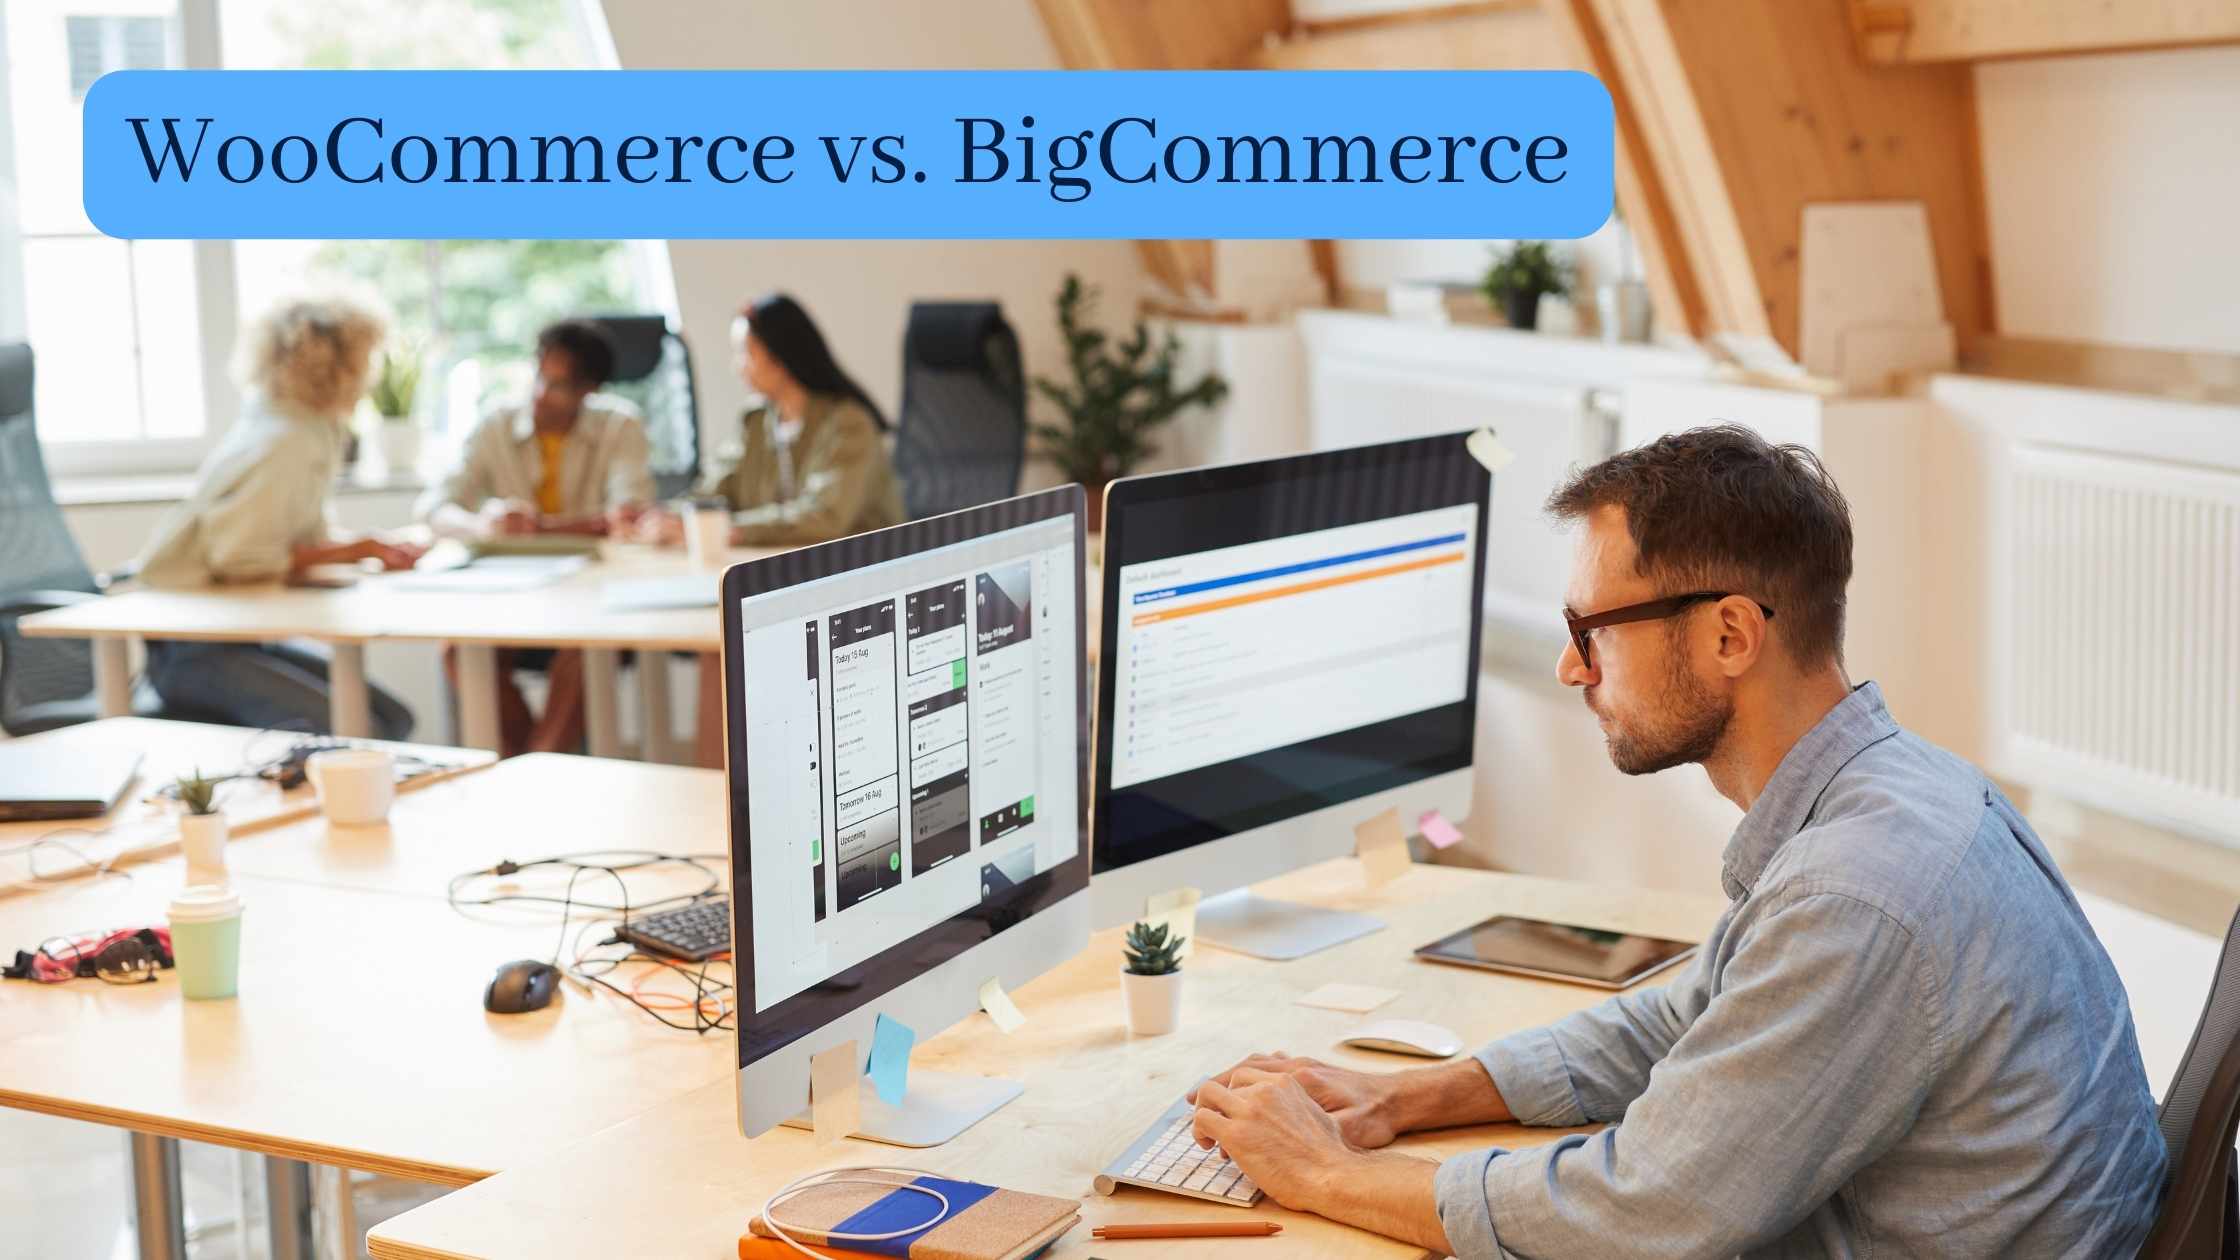 WooCommerce vs. BigCommerce: Compare features and pricing of both platforms